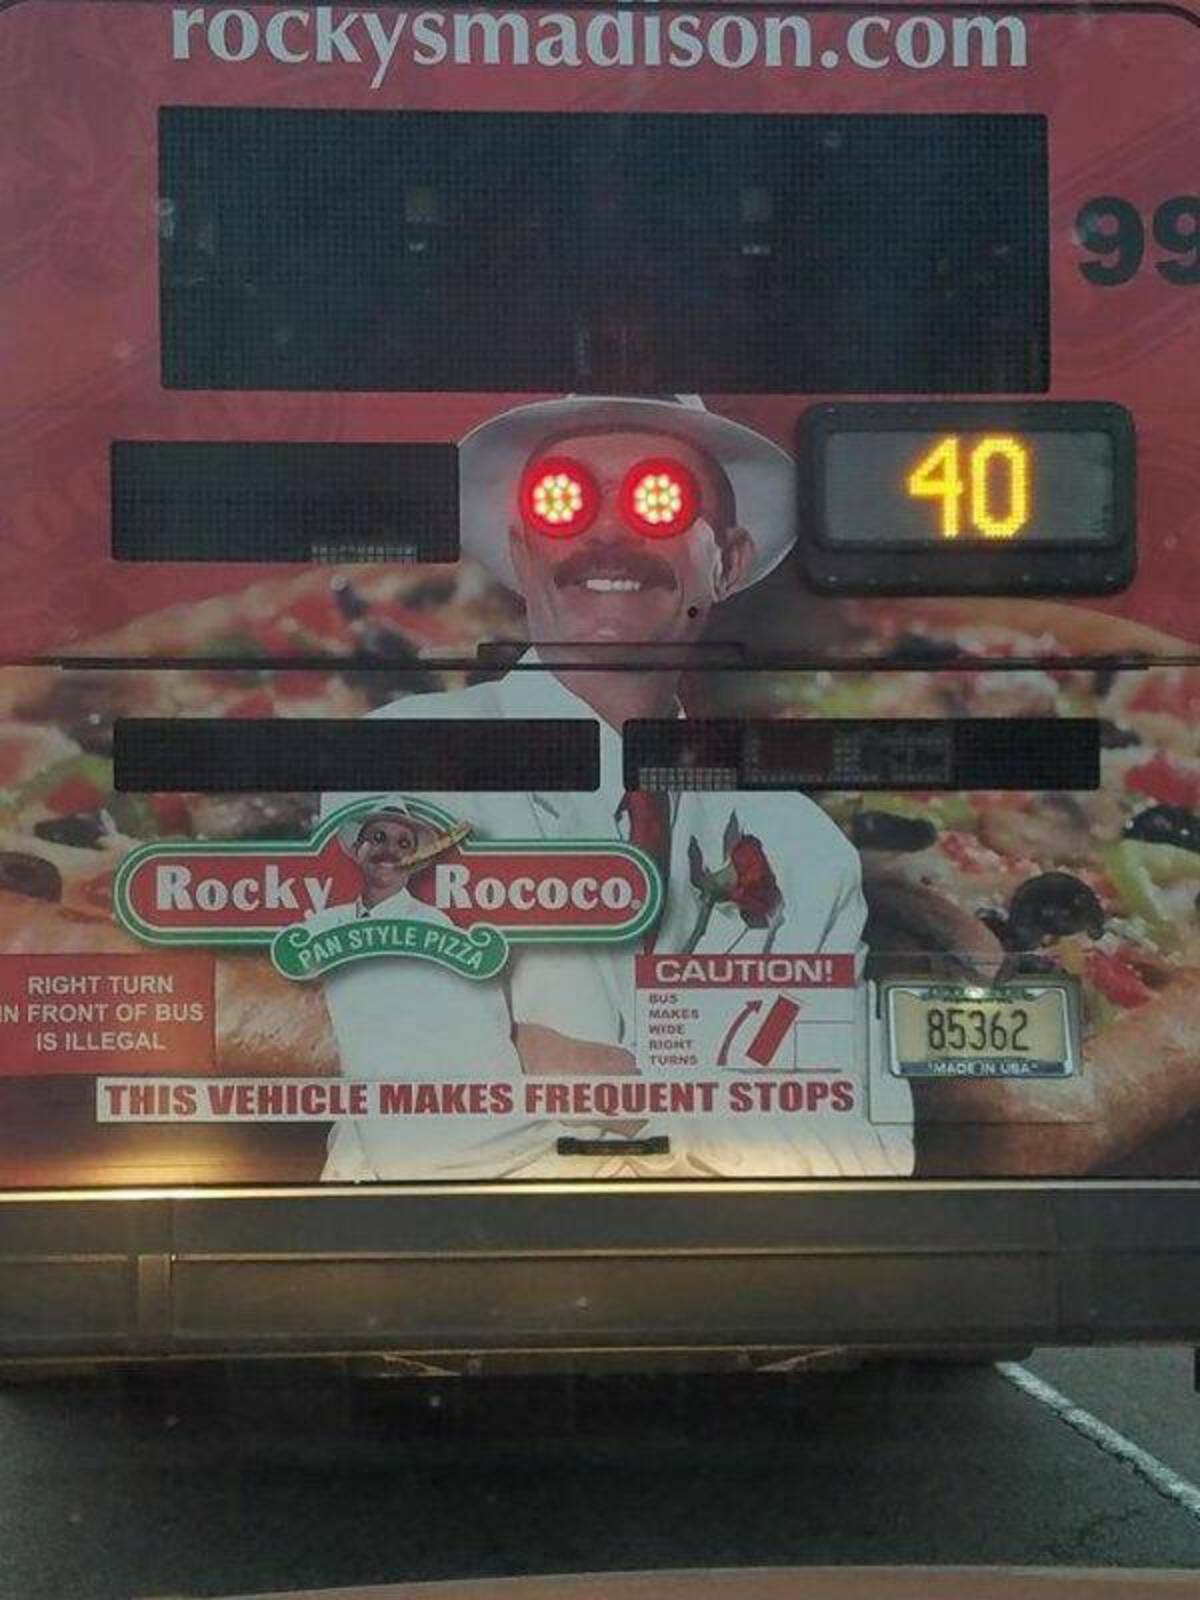 vehicle - rockysmadison.com Rocky Rococo. Span Style Pizza Caution! 1 This Vehicle Makes Frequent Stops Right Turn In Front Of Bus Is Illegal Bus Makes Wide Right Turns 40 85362 Madeon Usaci 99